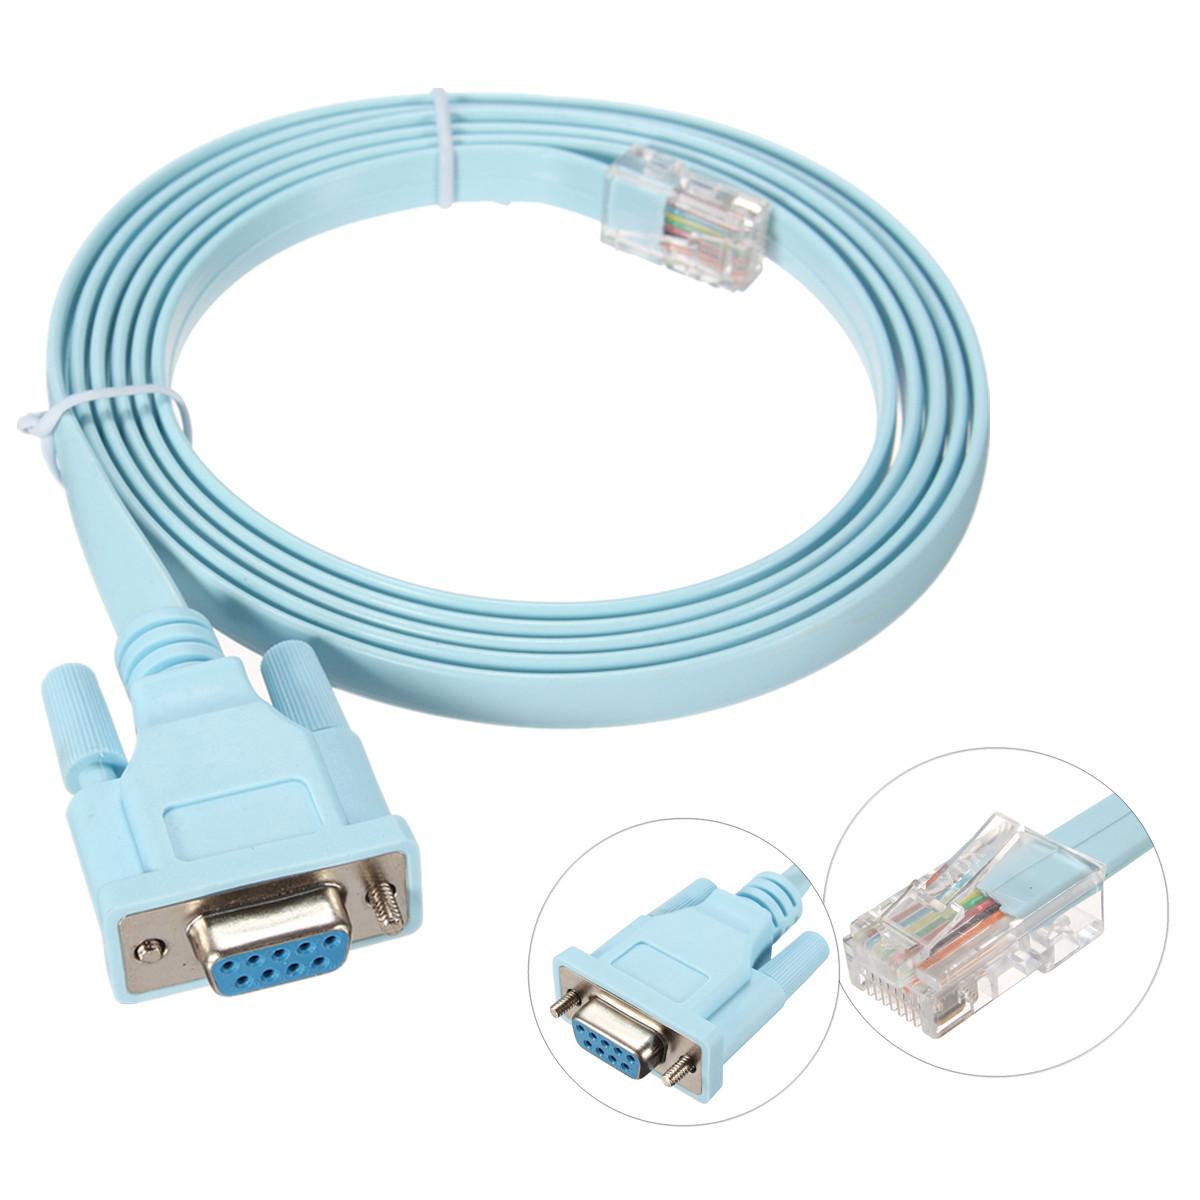 1 8m 6ft for cisco console cable rj45 cat5